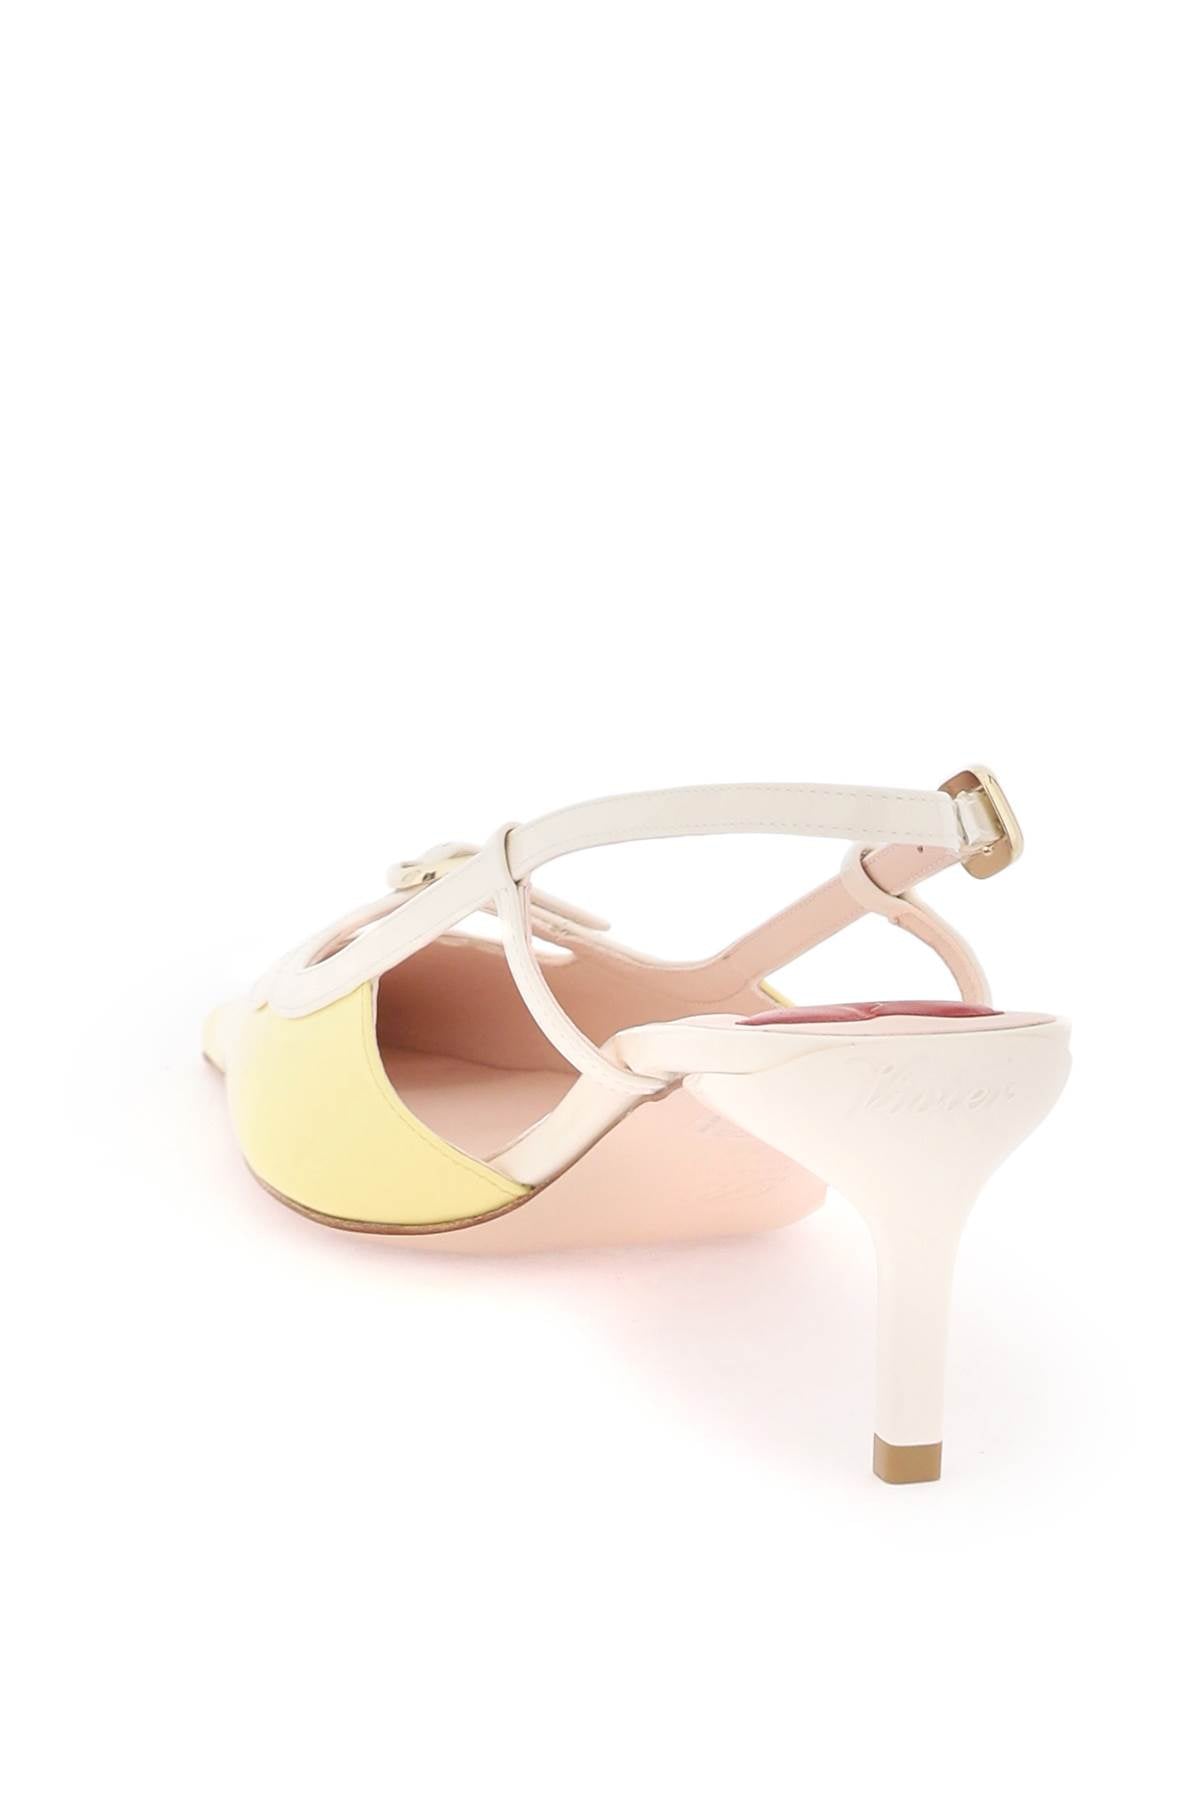 ROGER VIVIER Elegant Patent Leather Pumps with Adjustable Straps and Heart-Shaped Detail